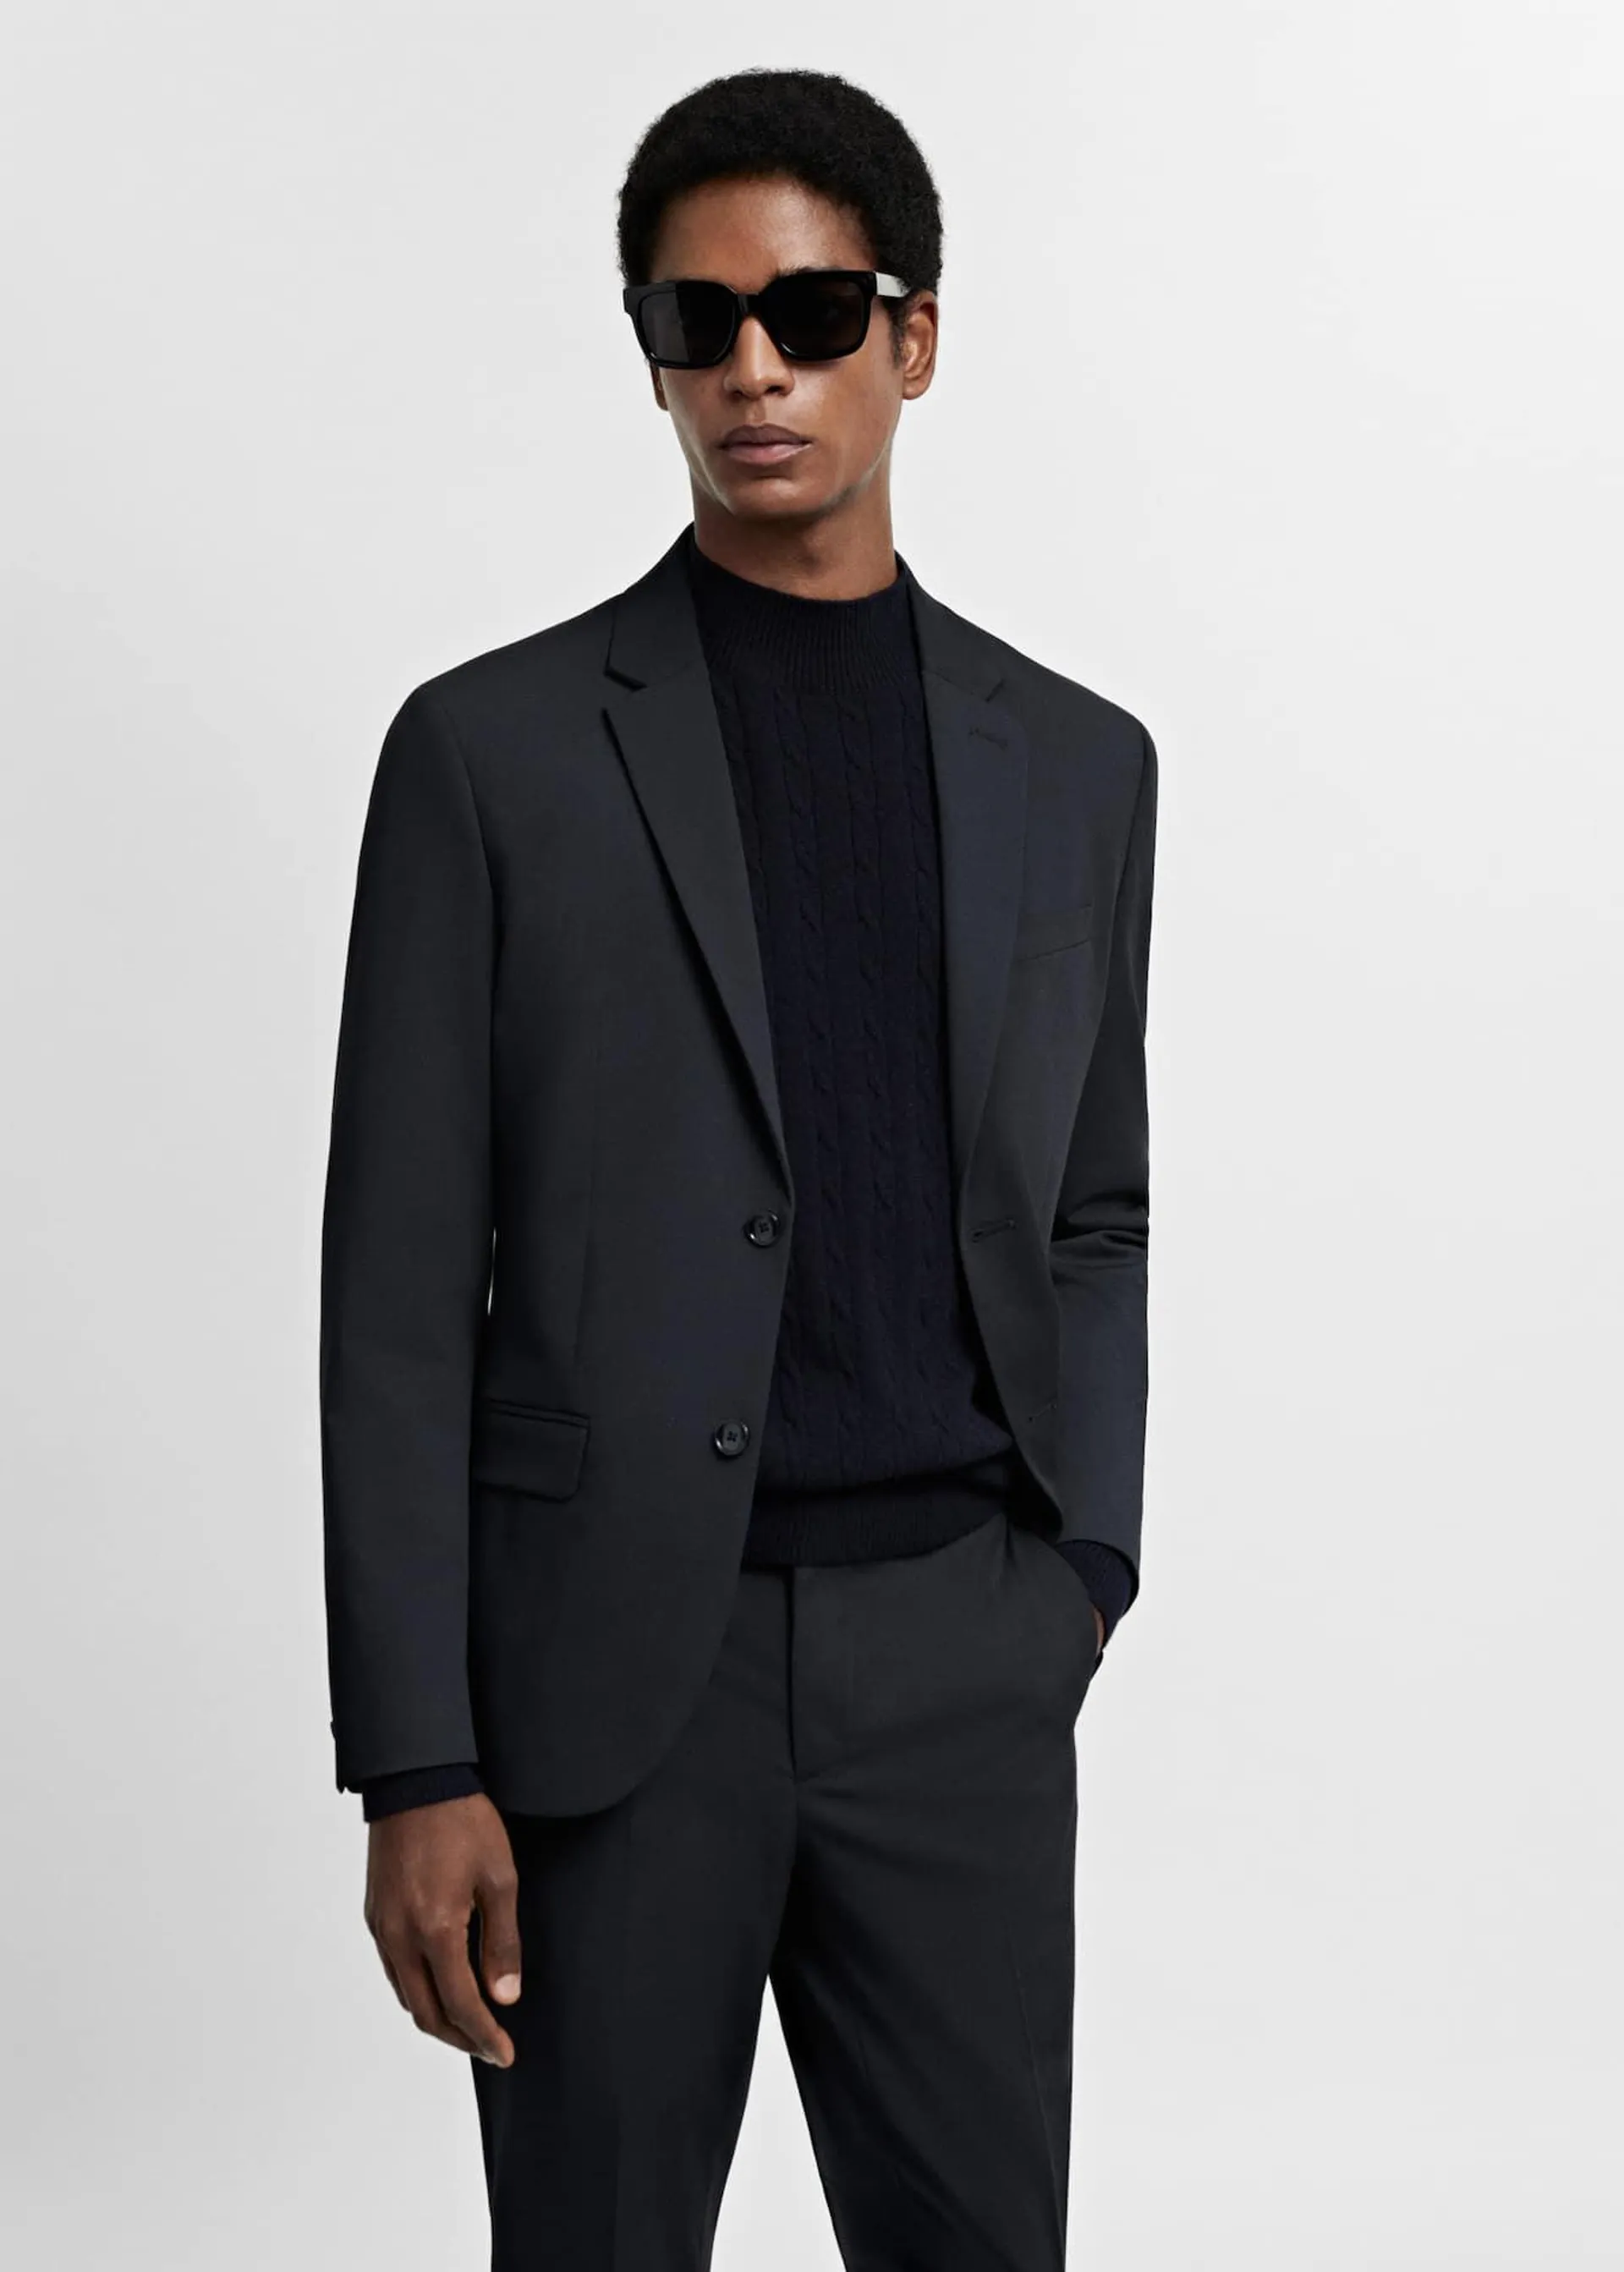 Super slim-fit suit jacket in stretch fabric